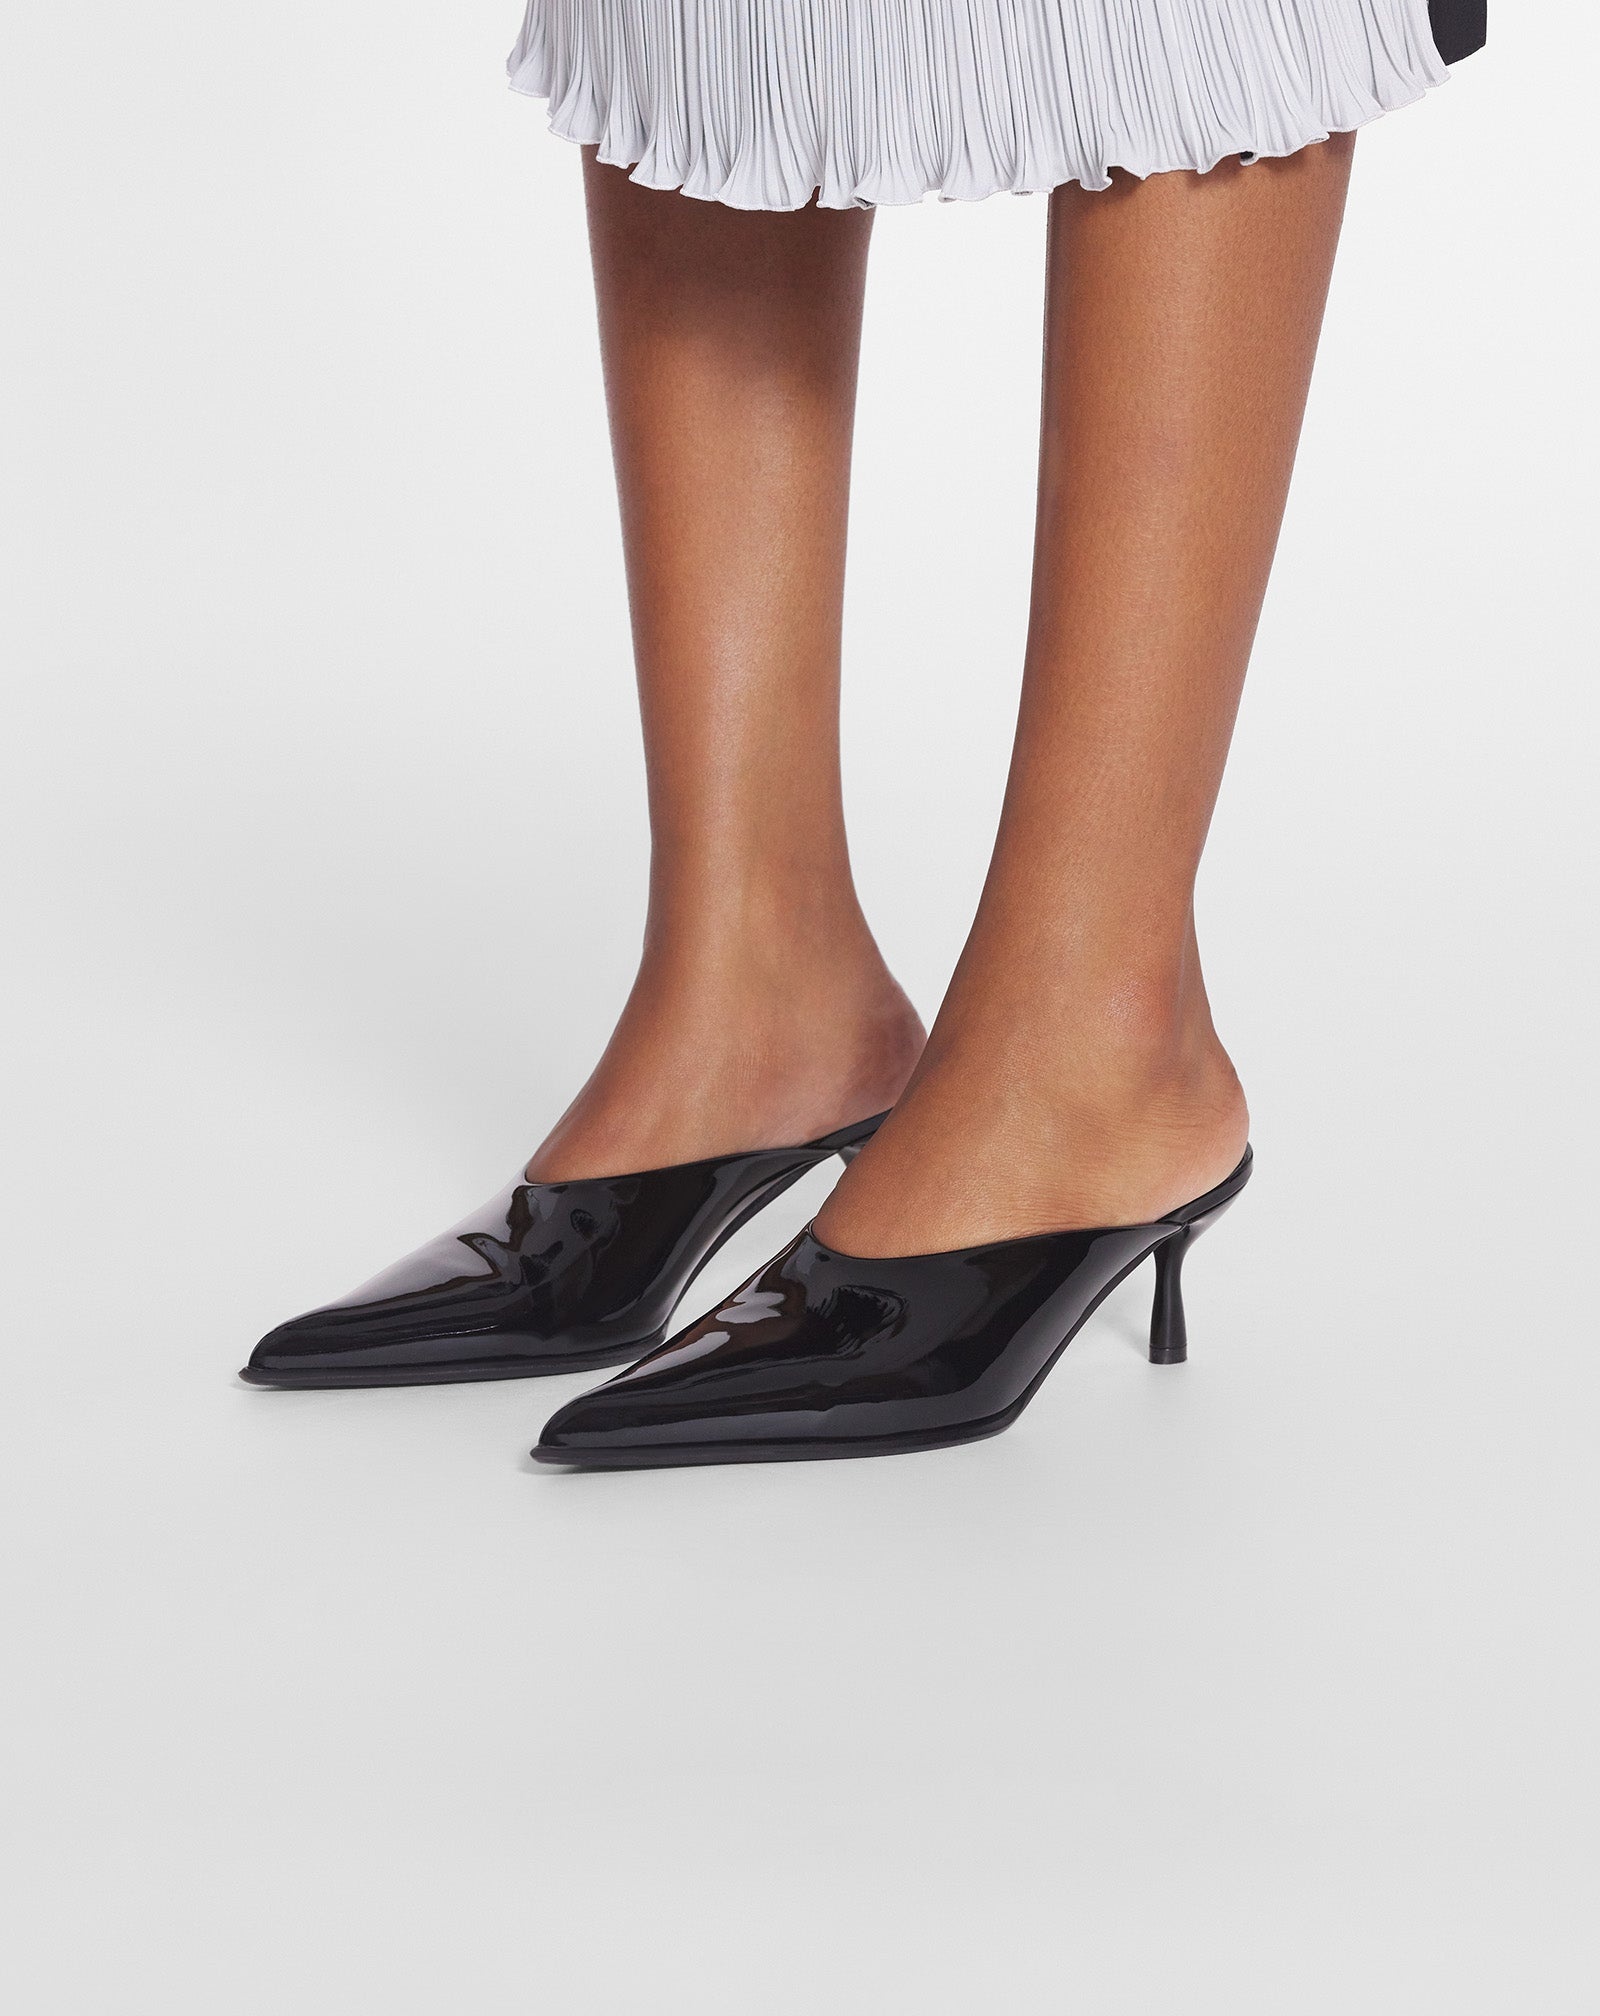 PATENT LEATHER HEELED MULES - 6